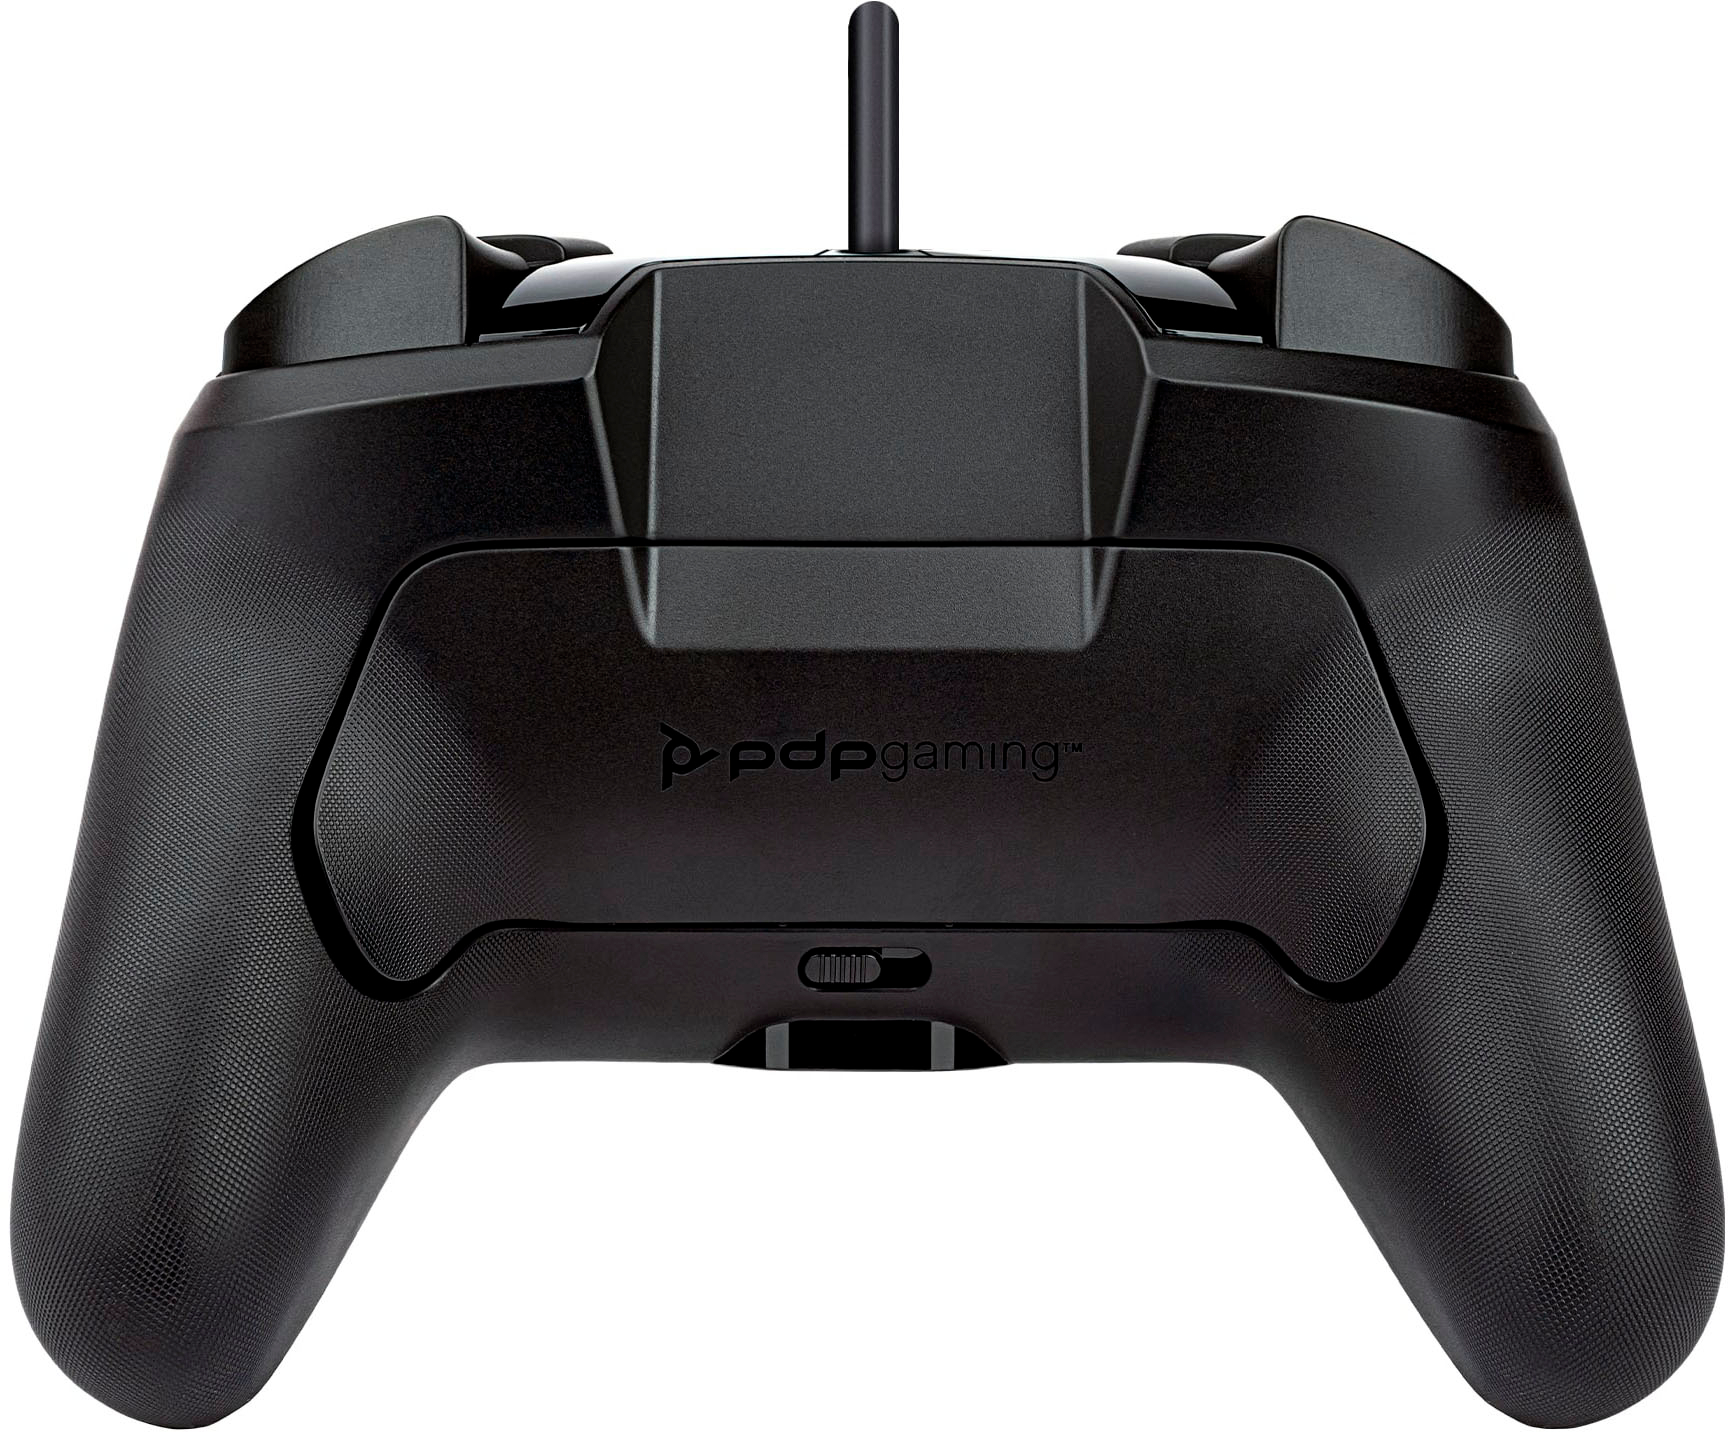 Back View: Altec Lansing - BattleGrip Mobile Gaming Controller with Triggers and Kickstand for all Mobile Devices - Black